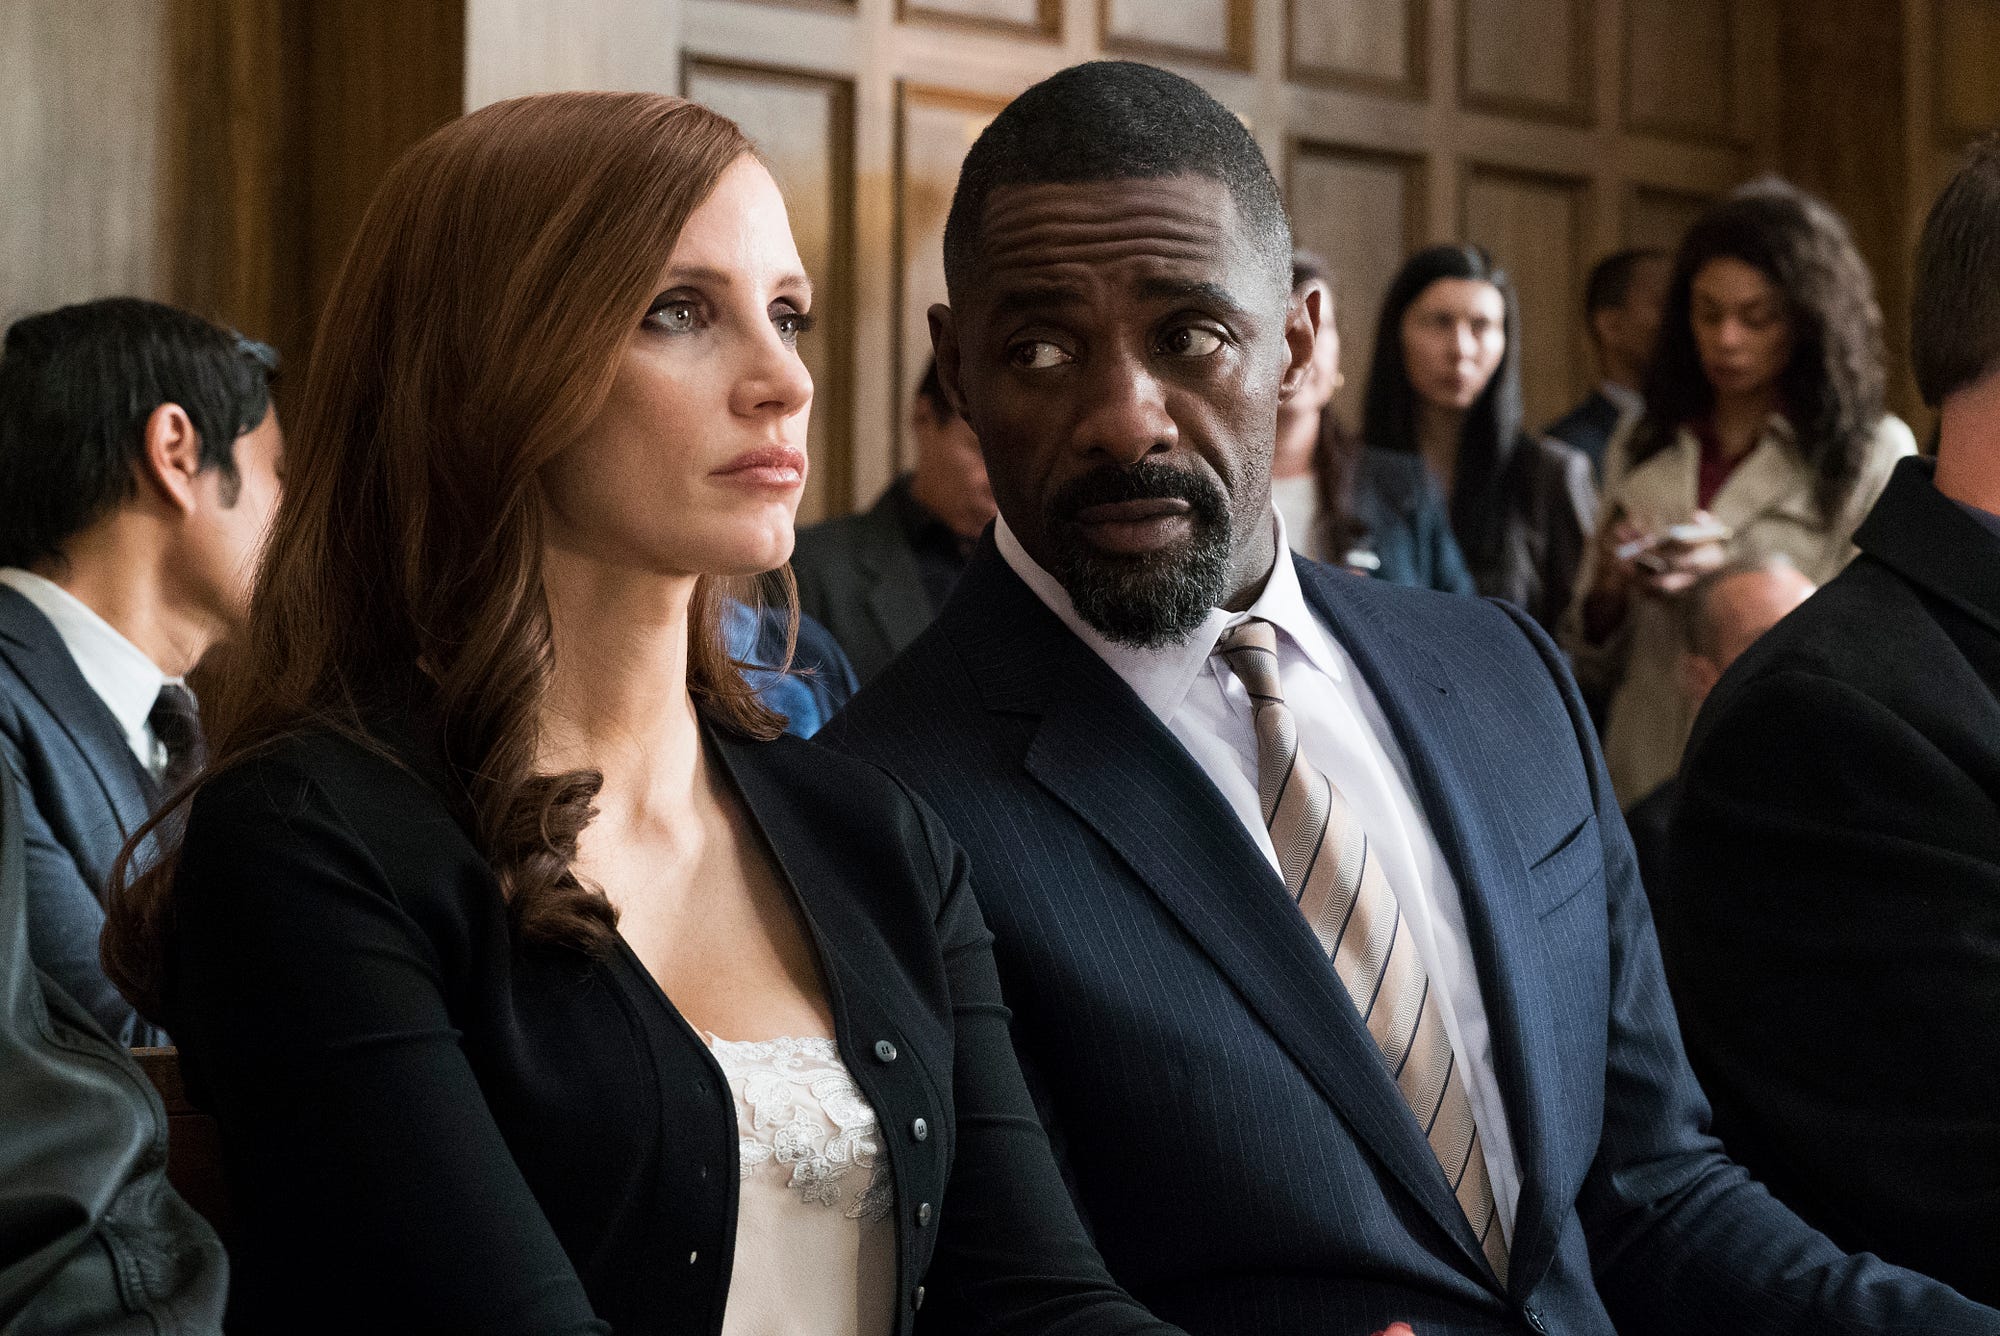 Image result for molly's game movie scenes